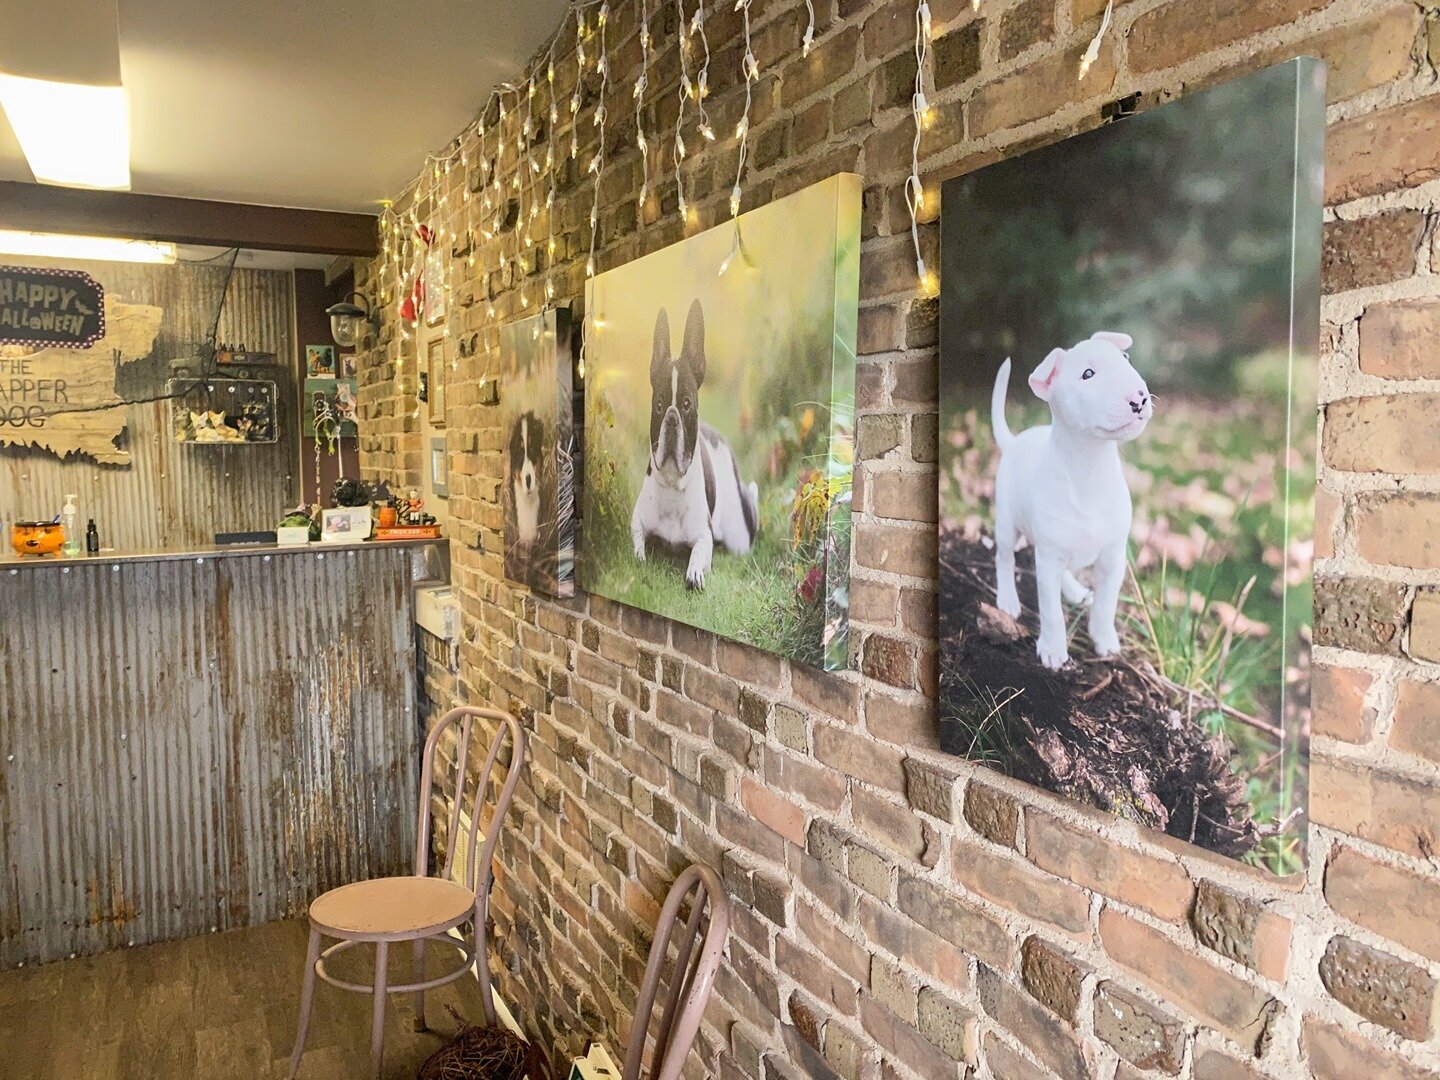 Today I visited the Dapper Dog Grooming Saloon to hang up a canvas wall art display of my photographs. Hailey is an amazing and kind dog groomer who I have known for many years. ⁠I just love the little shop she created, your dog might too!
⁠
⁠
⁠
⁠
⁠
